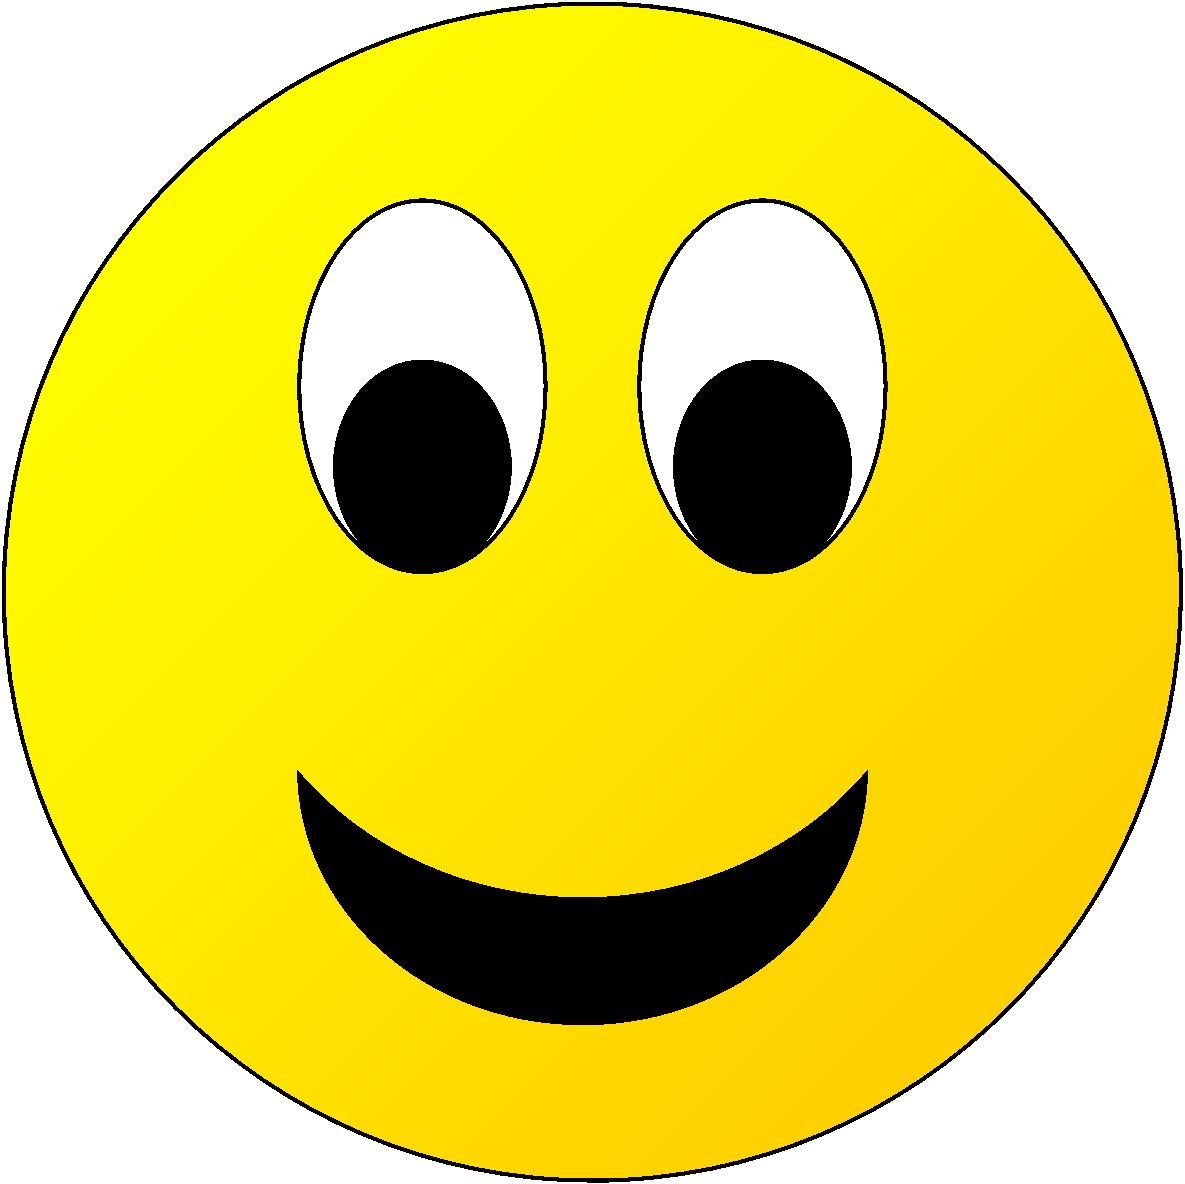 Smiley Faces Images Collection (49+)